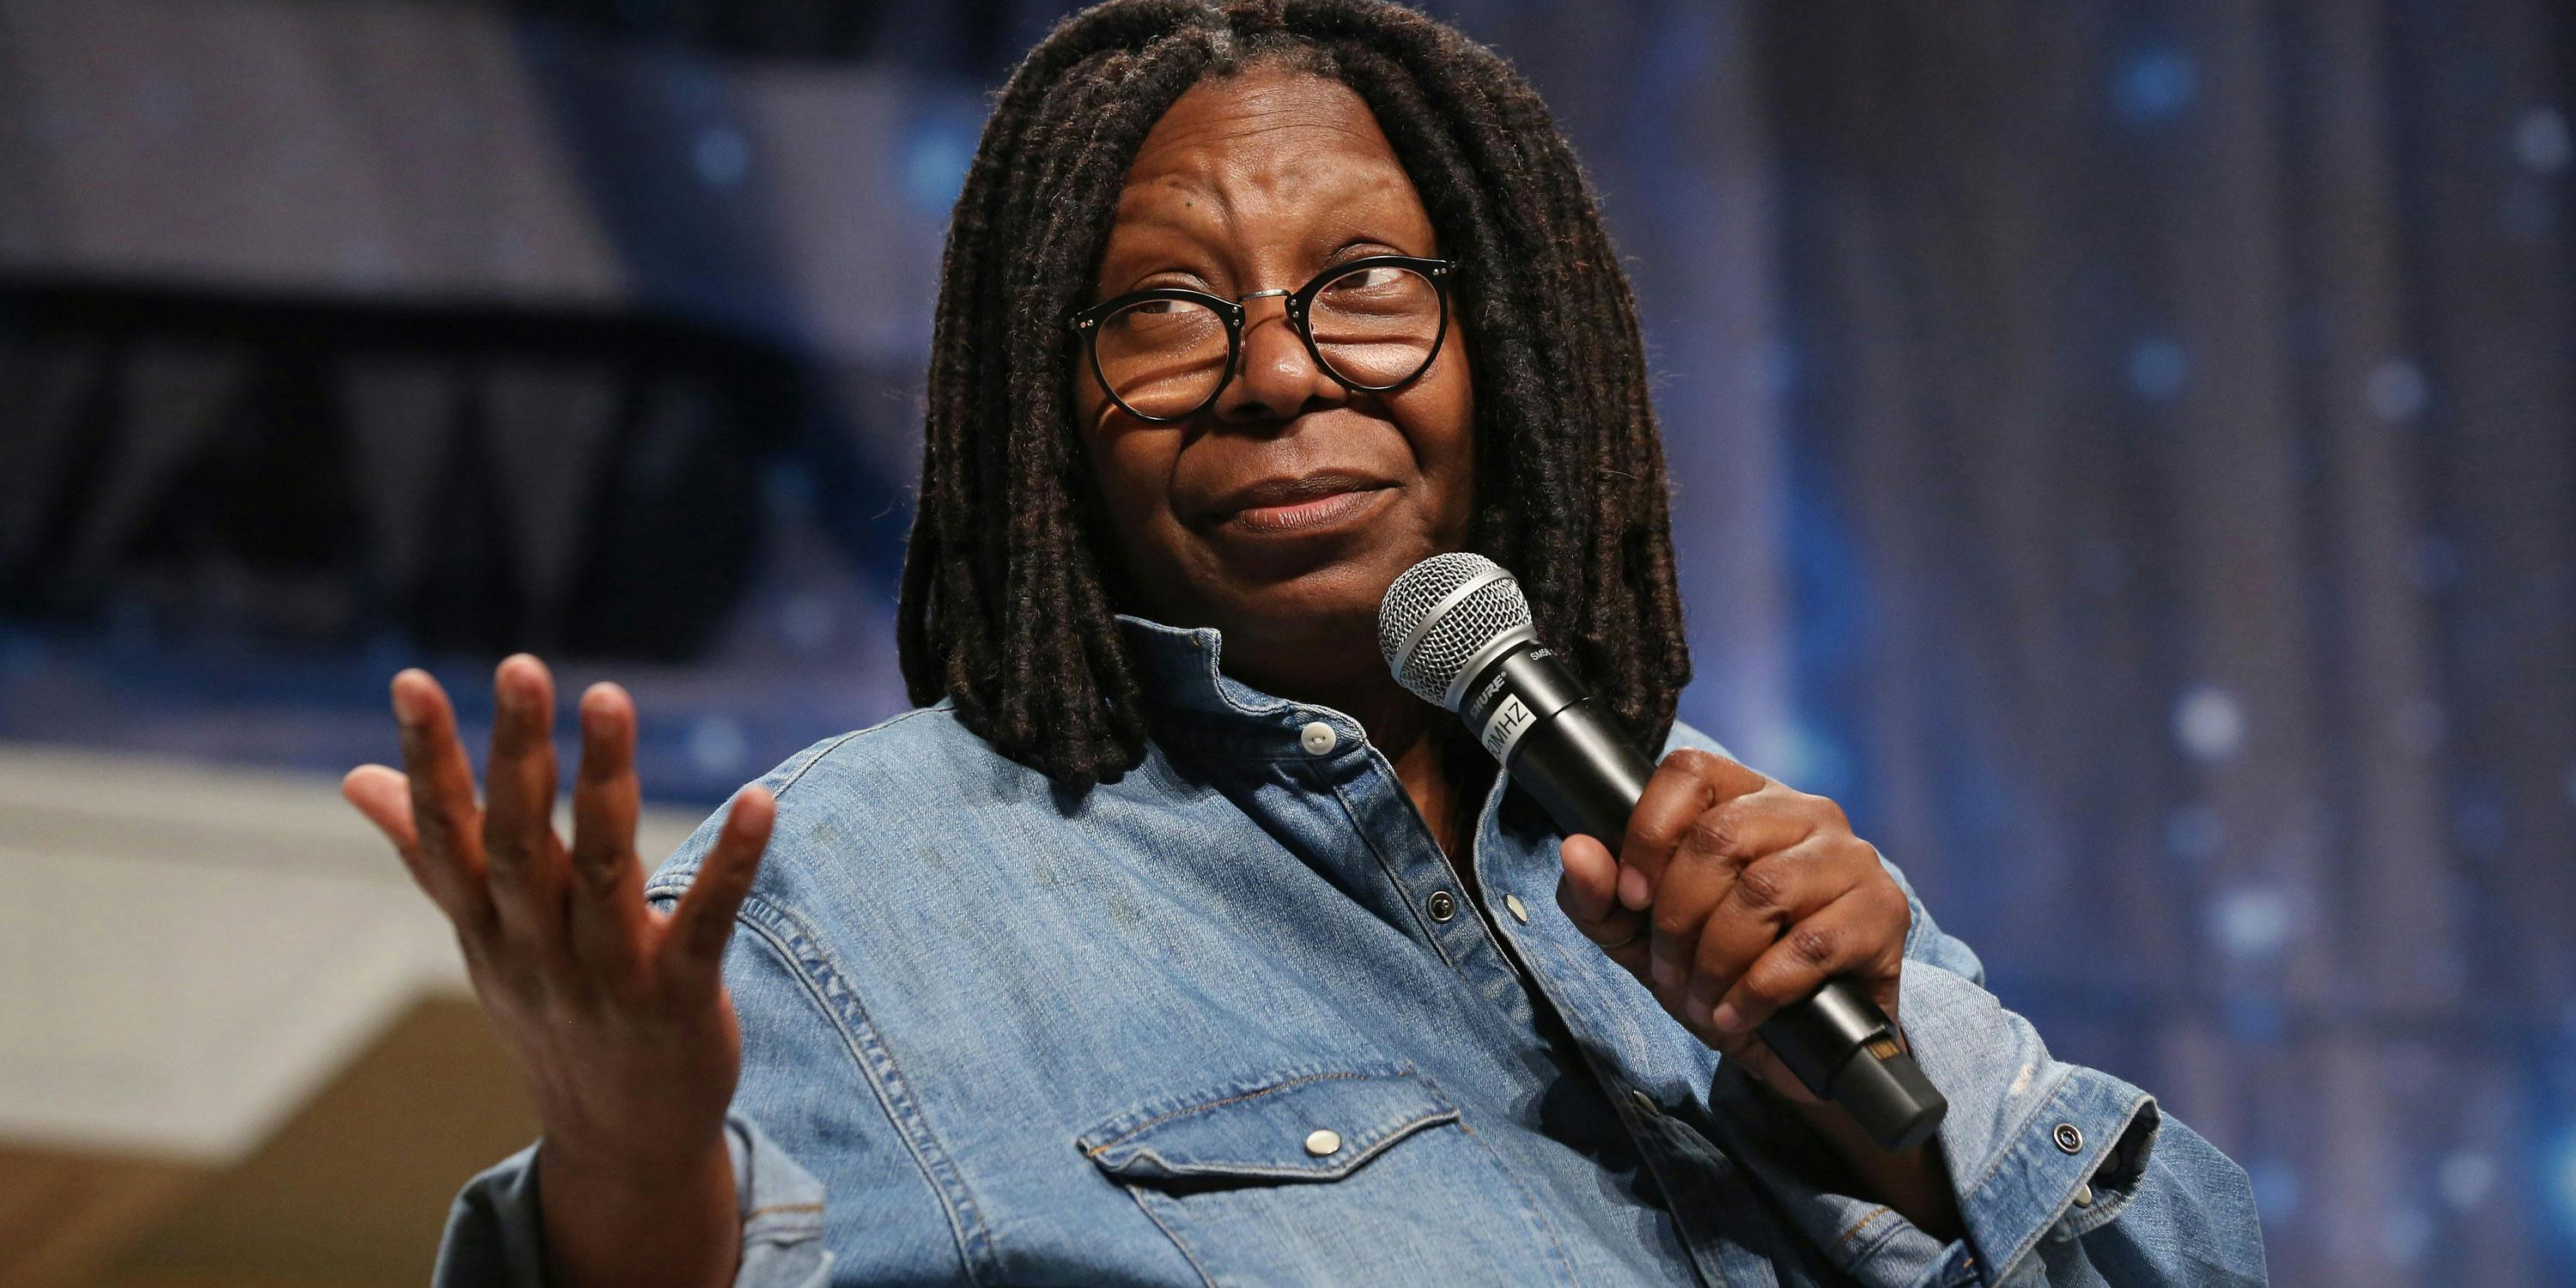 Actress Whoopi Goldberg speaks during the 15th annual official Star Trek convention at the Rio Hotel &amp; Casino on August 4, 2016 in Las Vegas, Nevada. She recently penned an opEd from for the Orange County Register on why women should use cannabis. (Photo by Gabe Ginsberg/Getty Images)